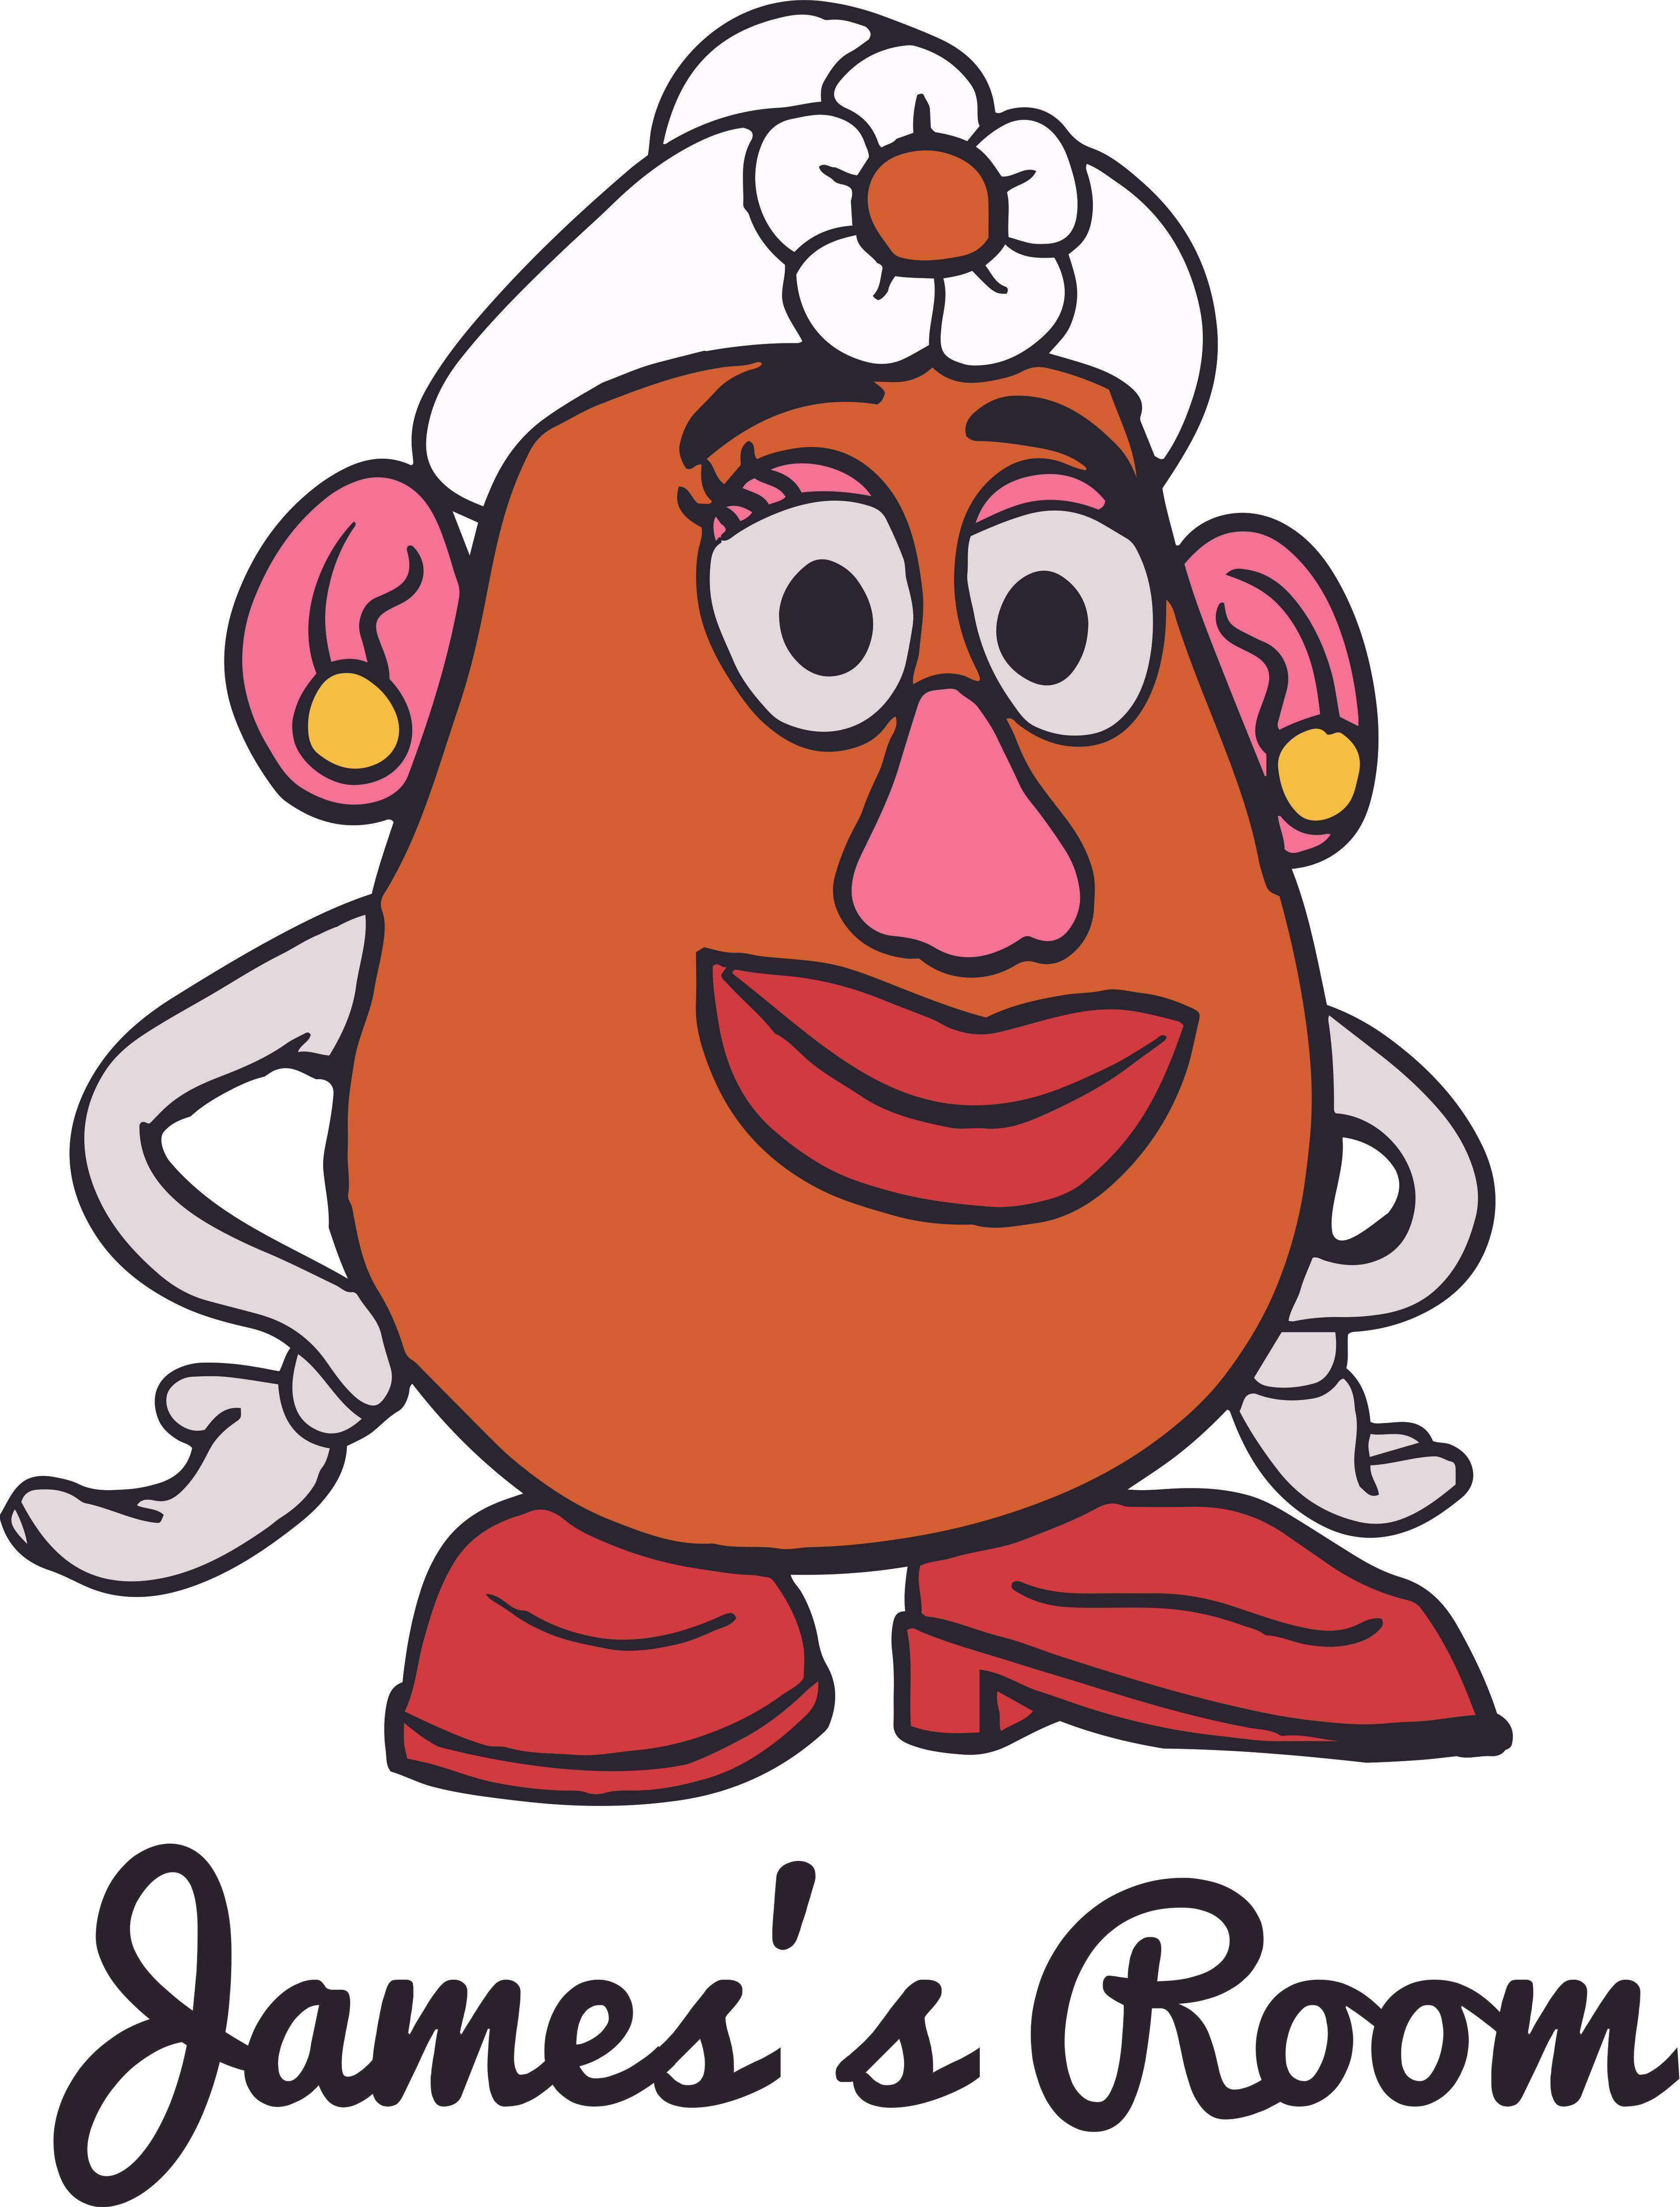 Disney Mrs Potato Head Toy Story Customized Wall Decal Custom Vinyl Wall Art Personalized Name Baby Girls Boys Kids Bedroom Wall Decal Room Decor Wall Stickers Decoration Size x12